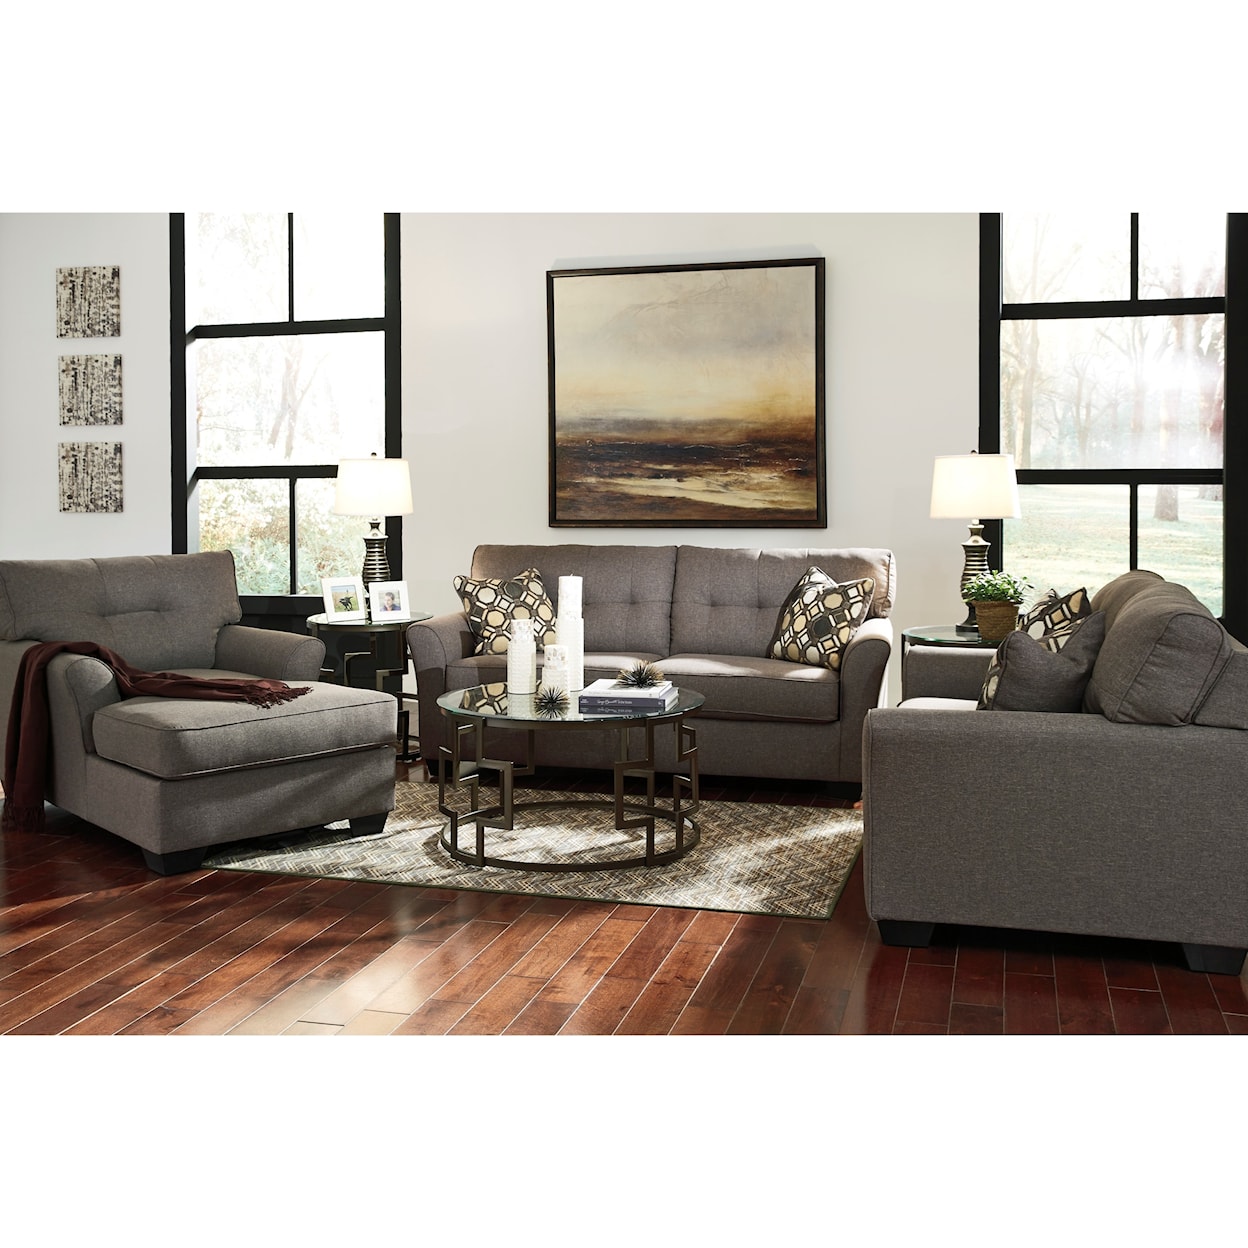 Signature Design by Ashley Tibbee 3pc Living Room Group